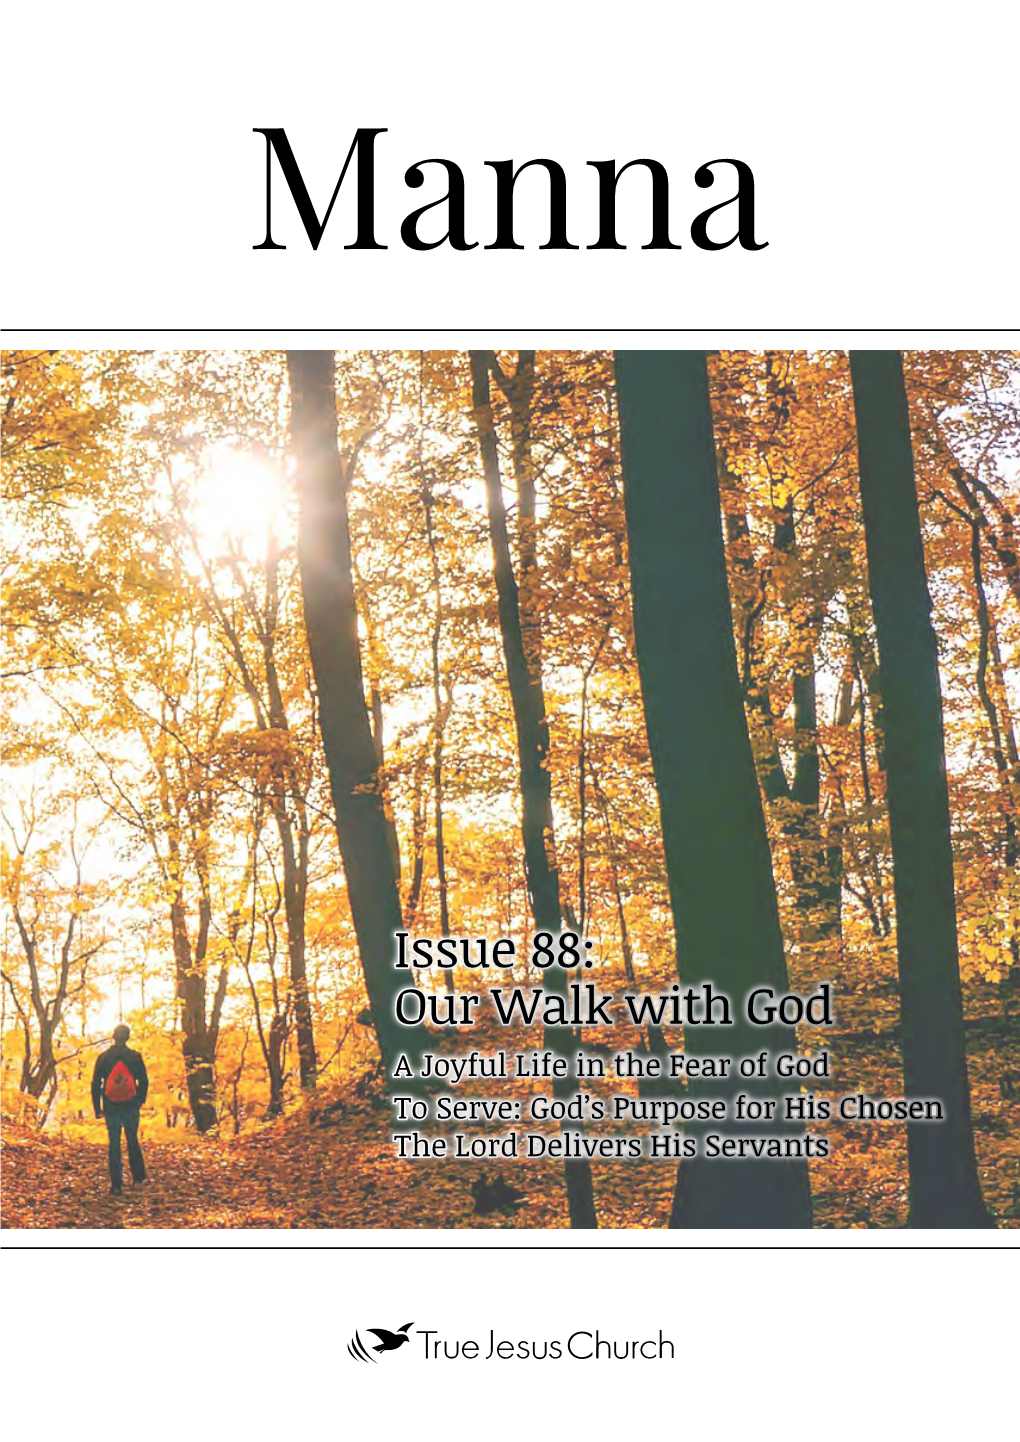 Issue 88: Our Walk with God a Joyful Life in the Fear of God to Serve: God’S Purpose for His Chosen the Lord Delivers His Servants Issue 88 Vol